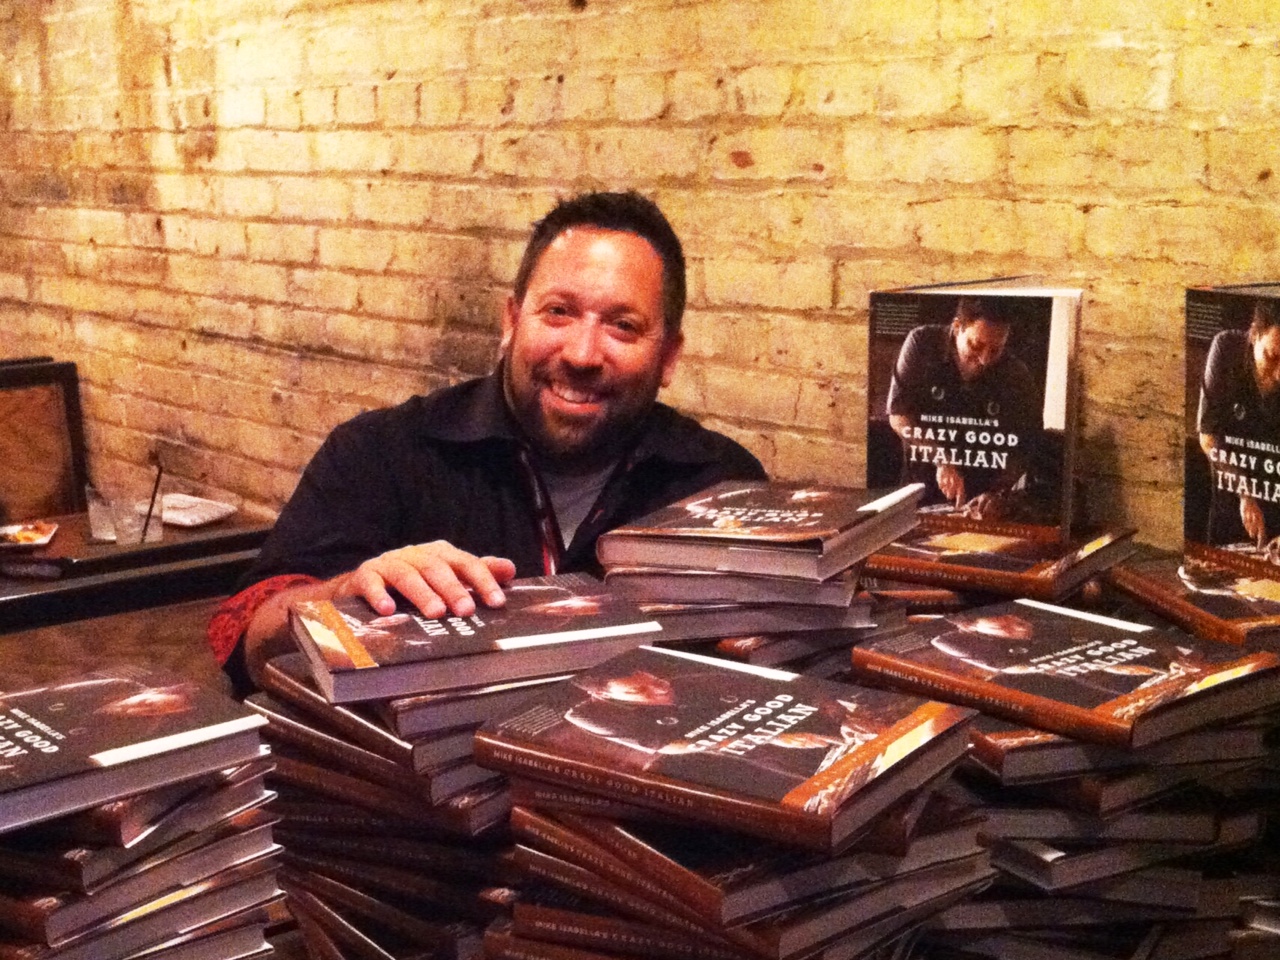 Mike Isabella’s Crazy Good Italian Cookbook Launch